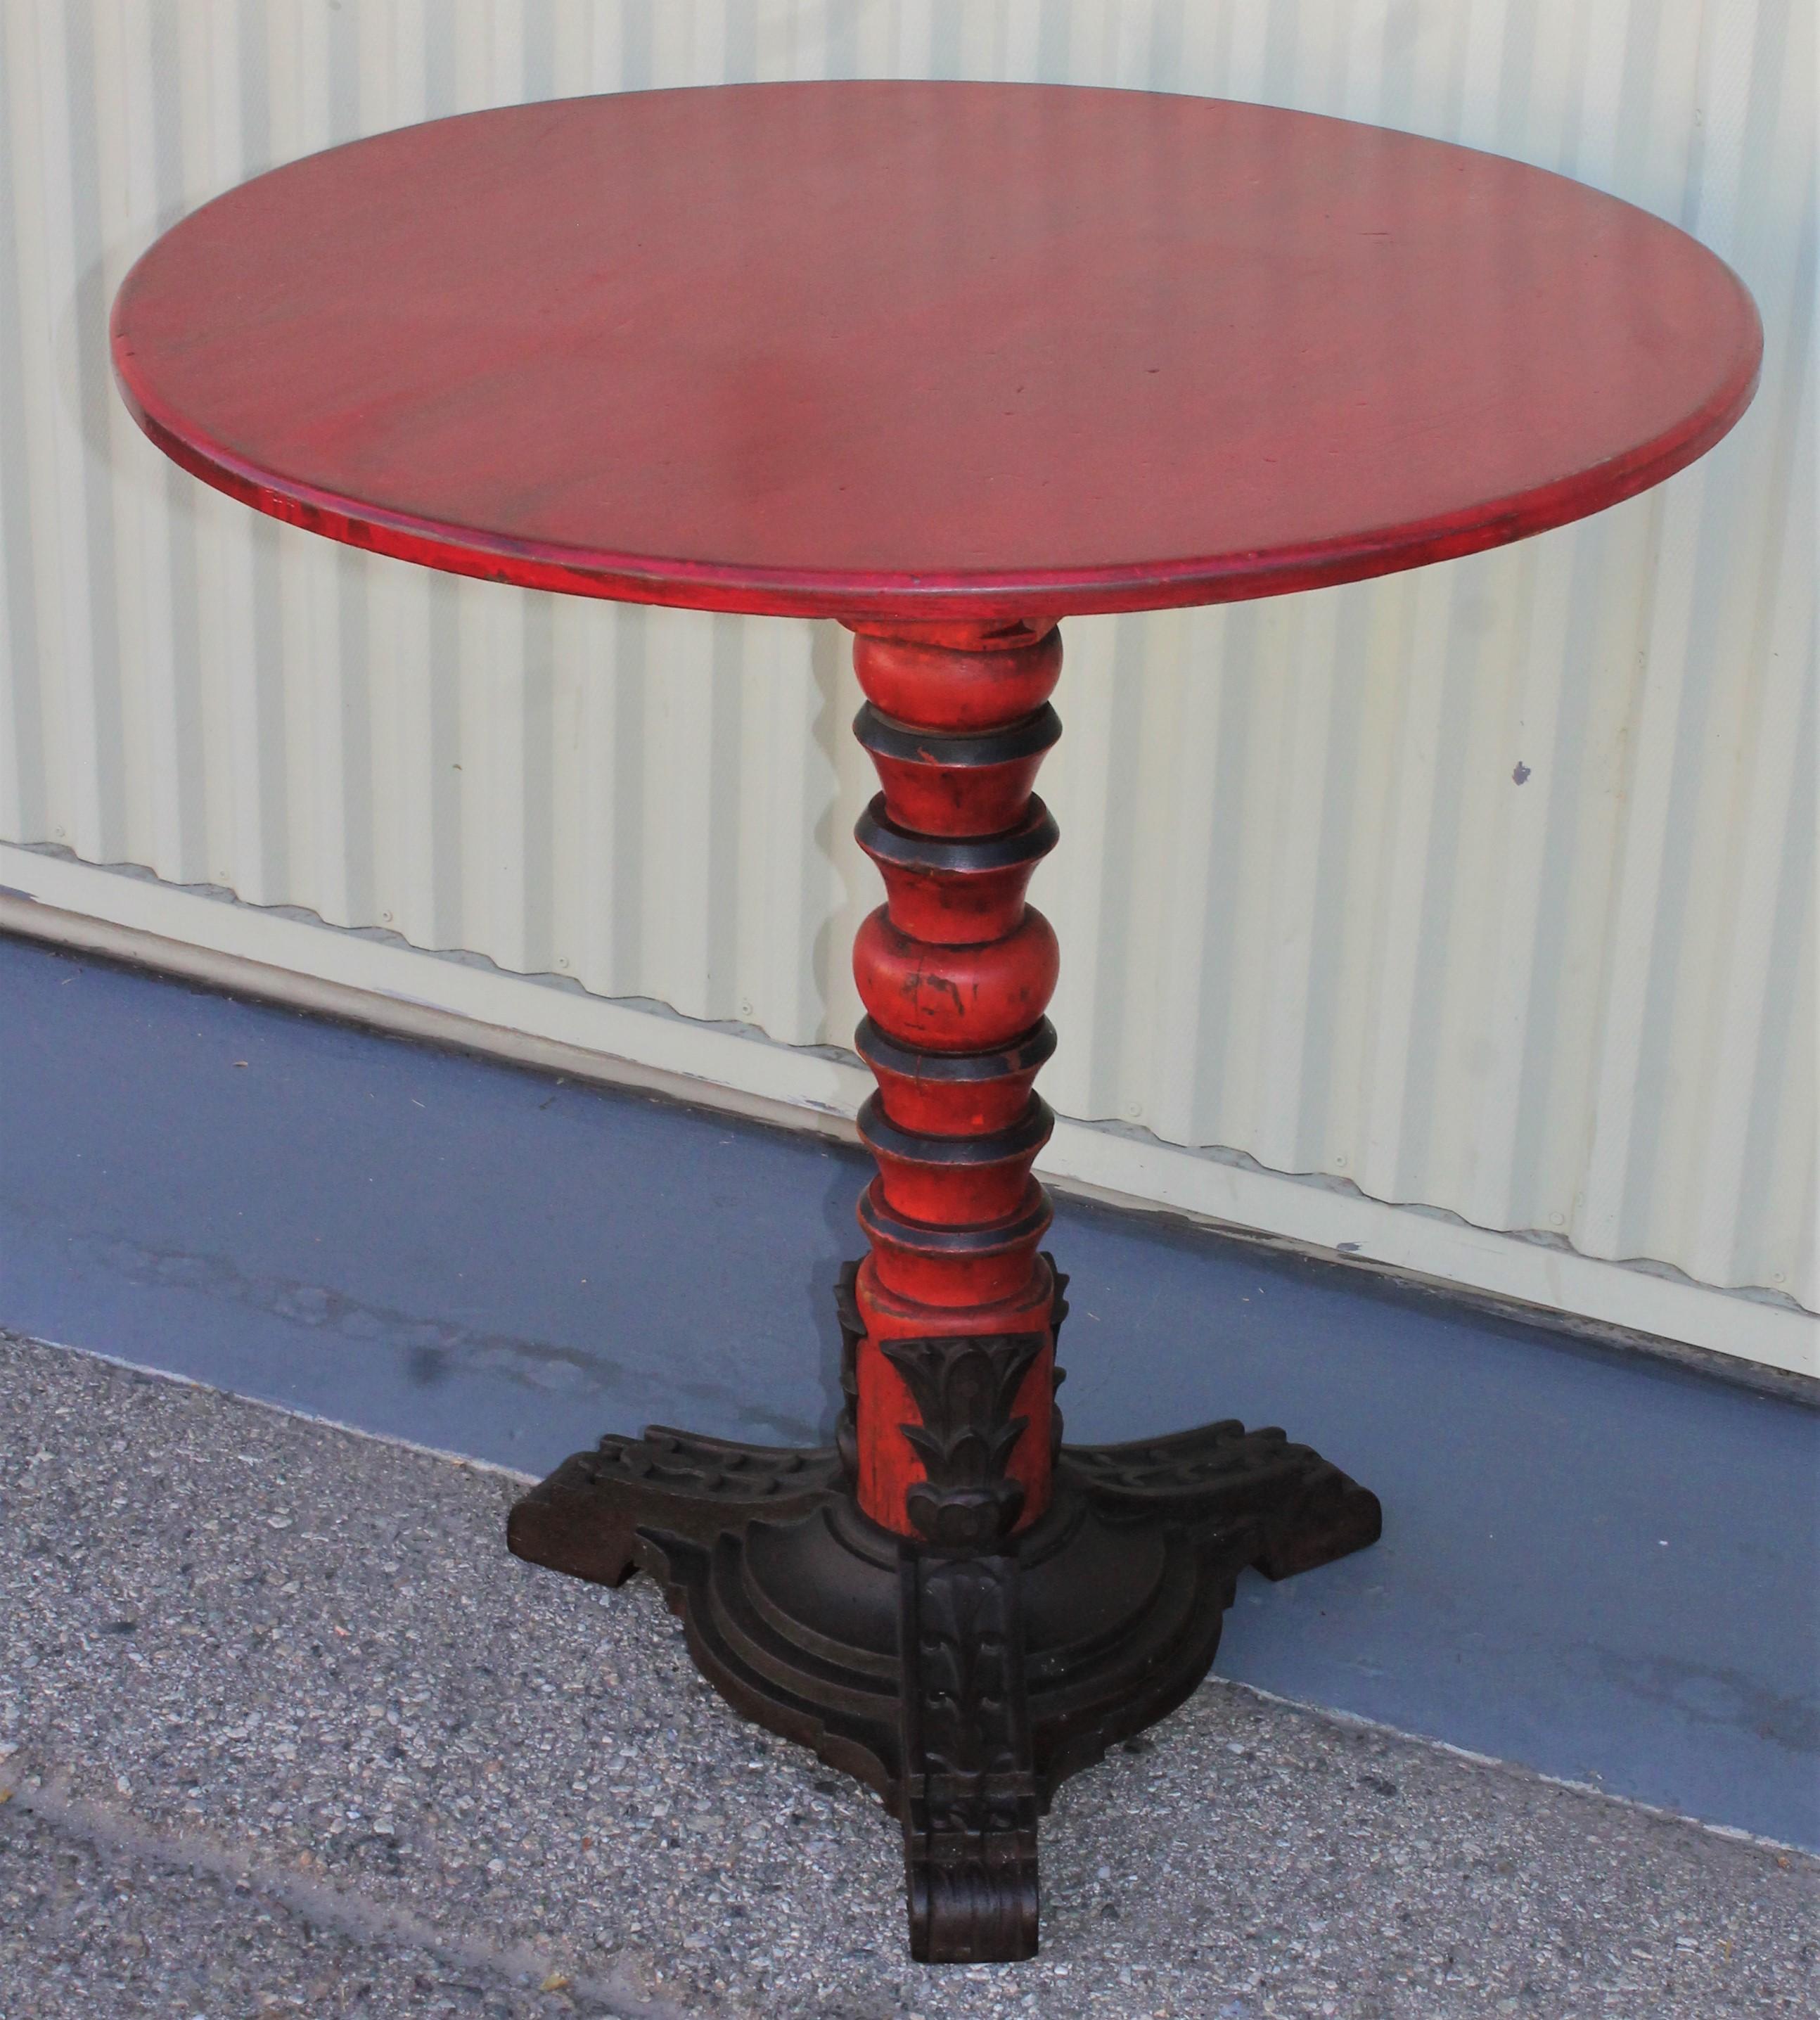 All original tomato red wood top and wood and iron base from the Old Chinese Theater in Los Angeles. This table has the original manufacturers plaque on the inside of the table. Looks great with modern or country furniture. 

The manufacturers